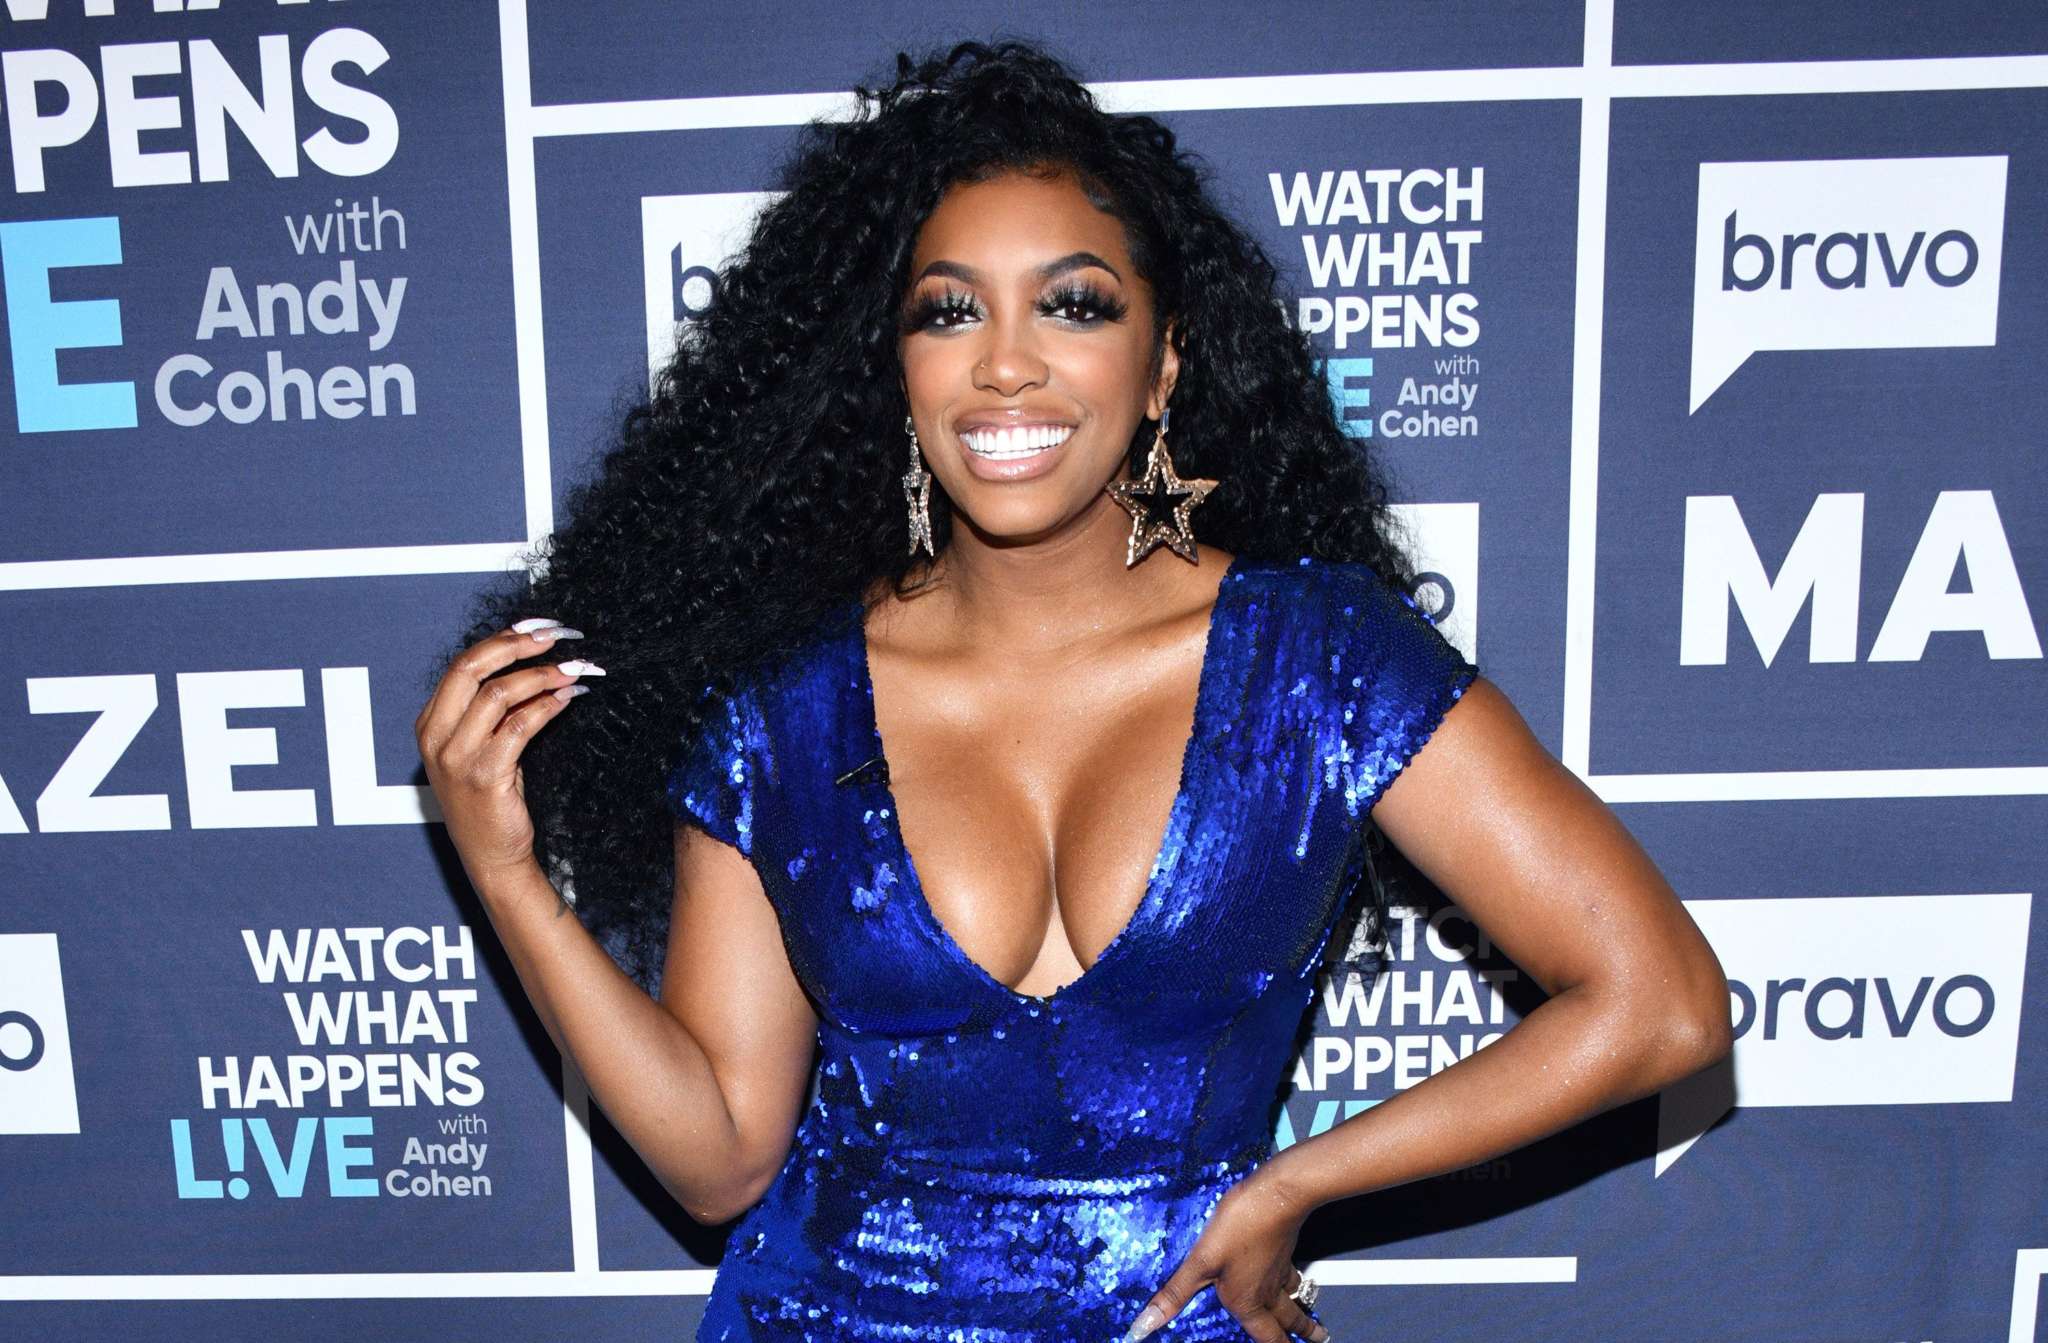 Porsha Williams Has A Surprise For Fans - Check It Out Here